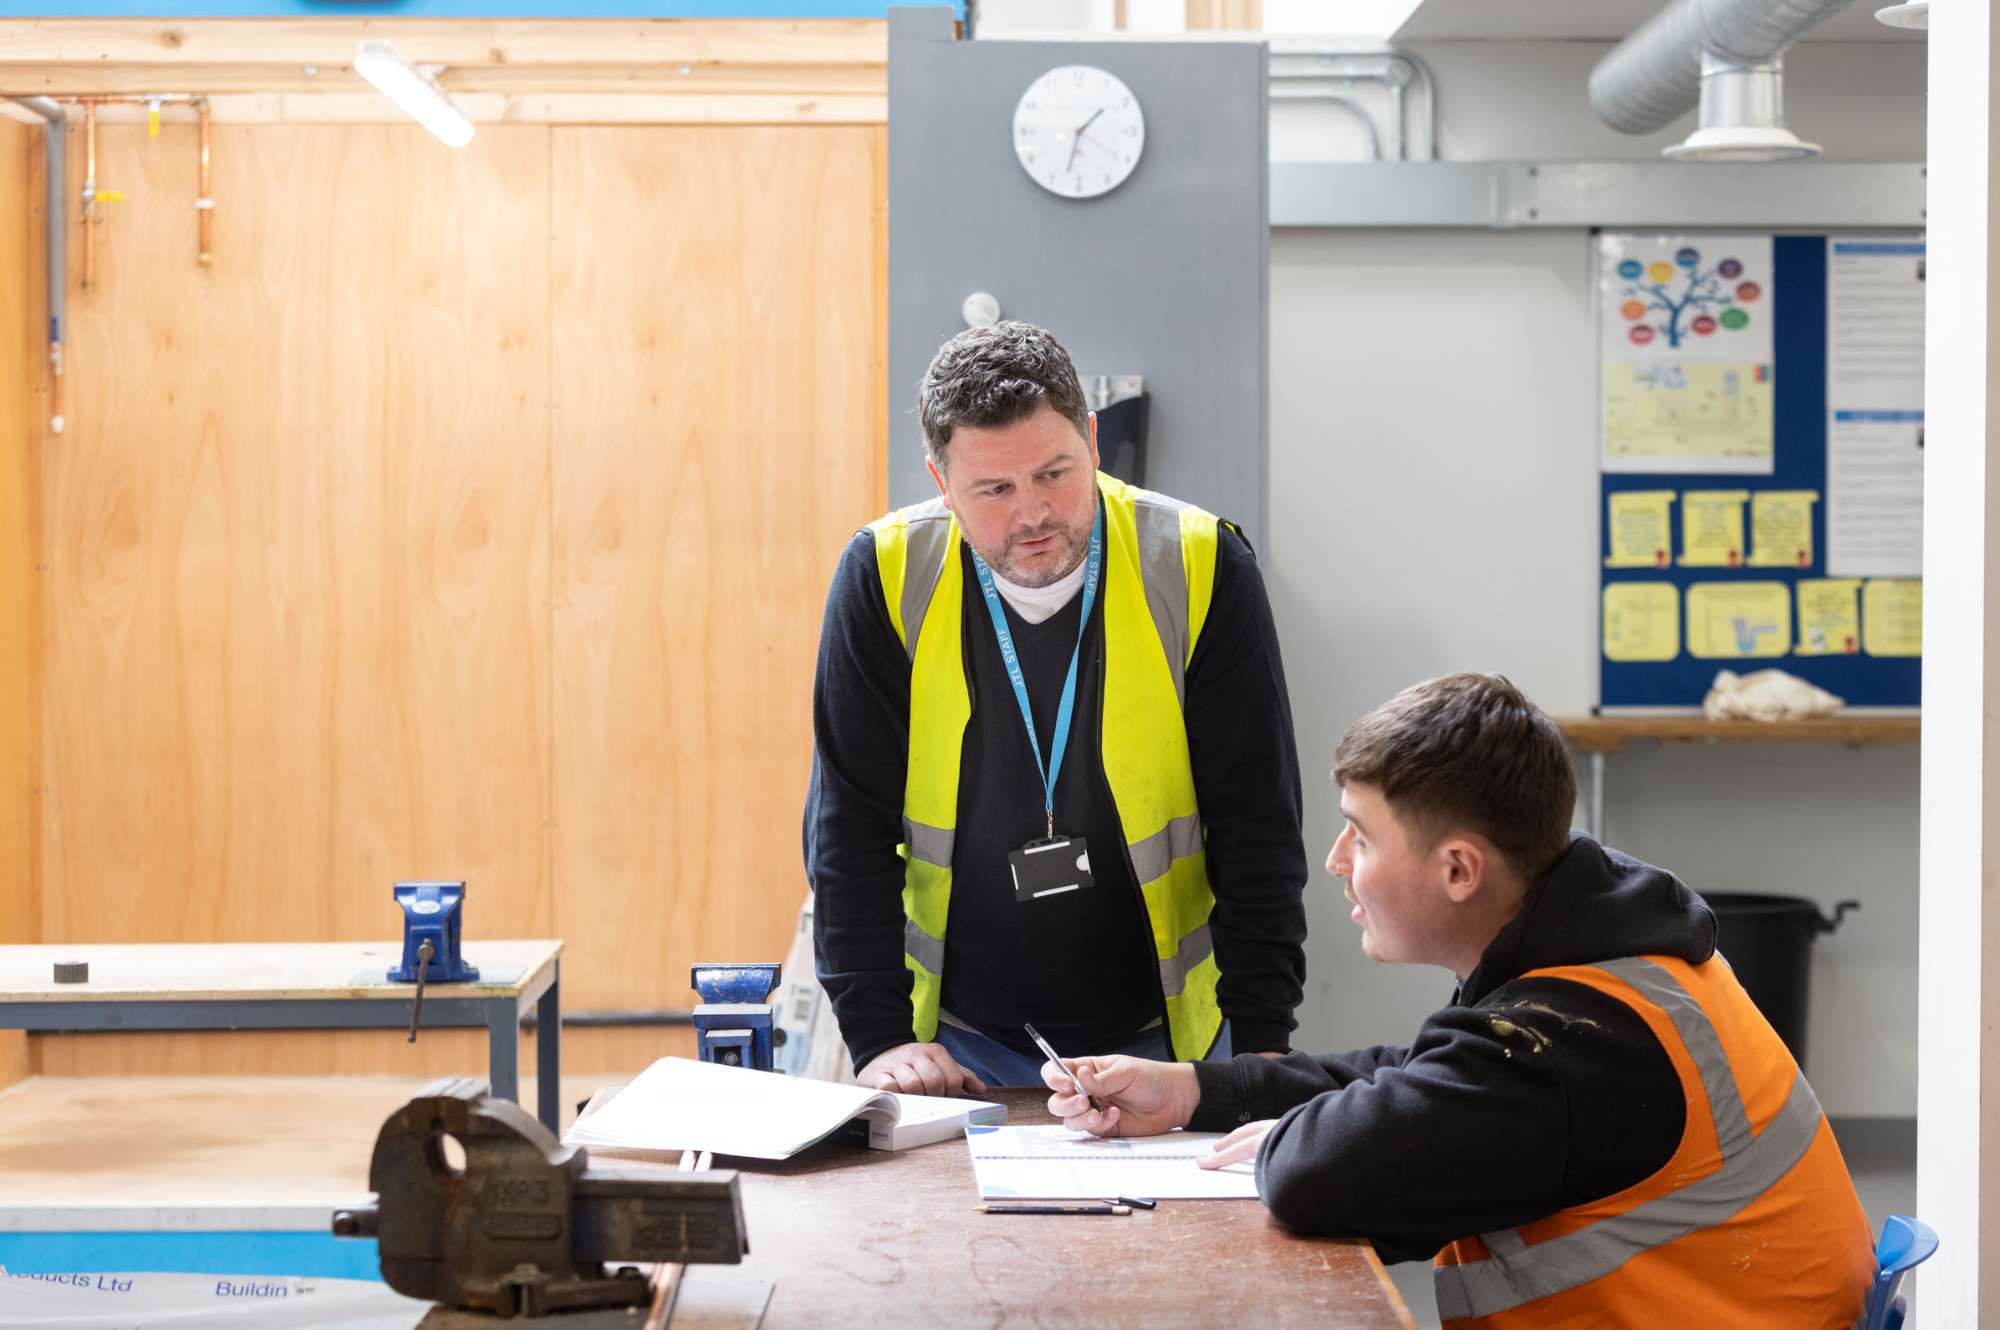 JTL partners with Chelmsford College to provide Plumbing and Heating Apprenticeships